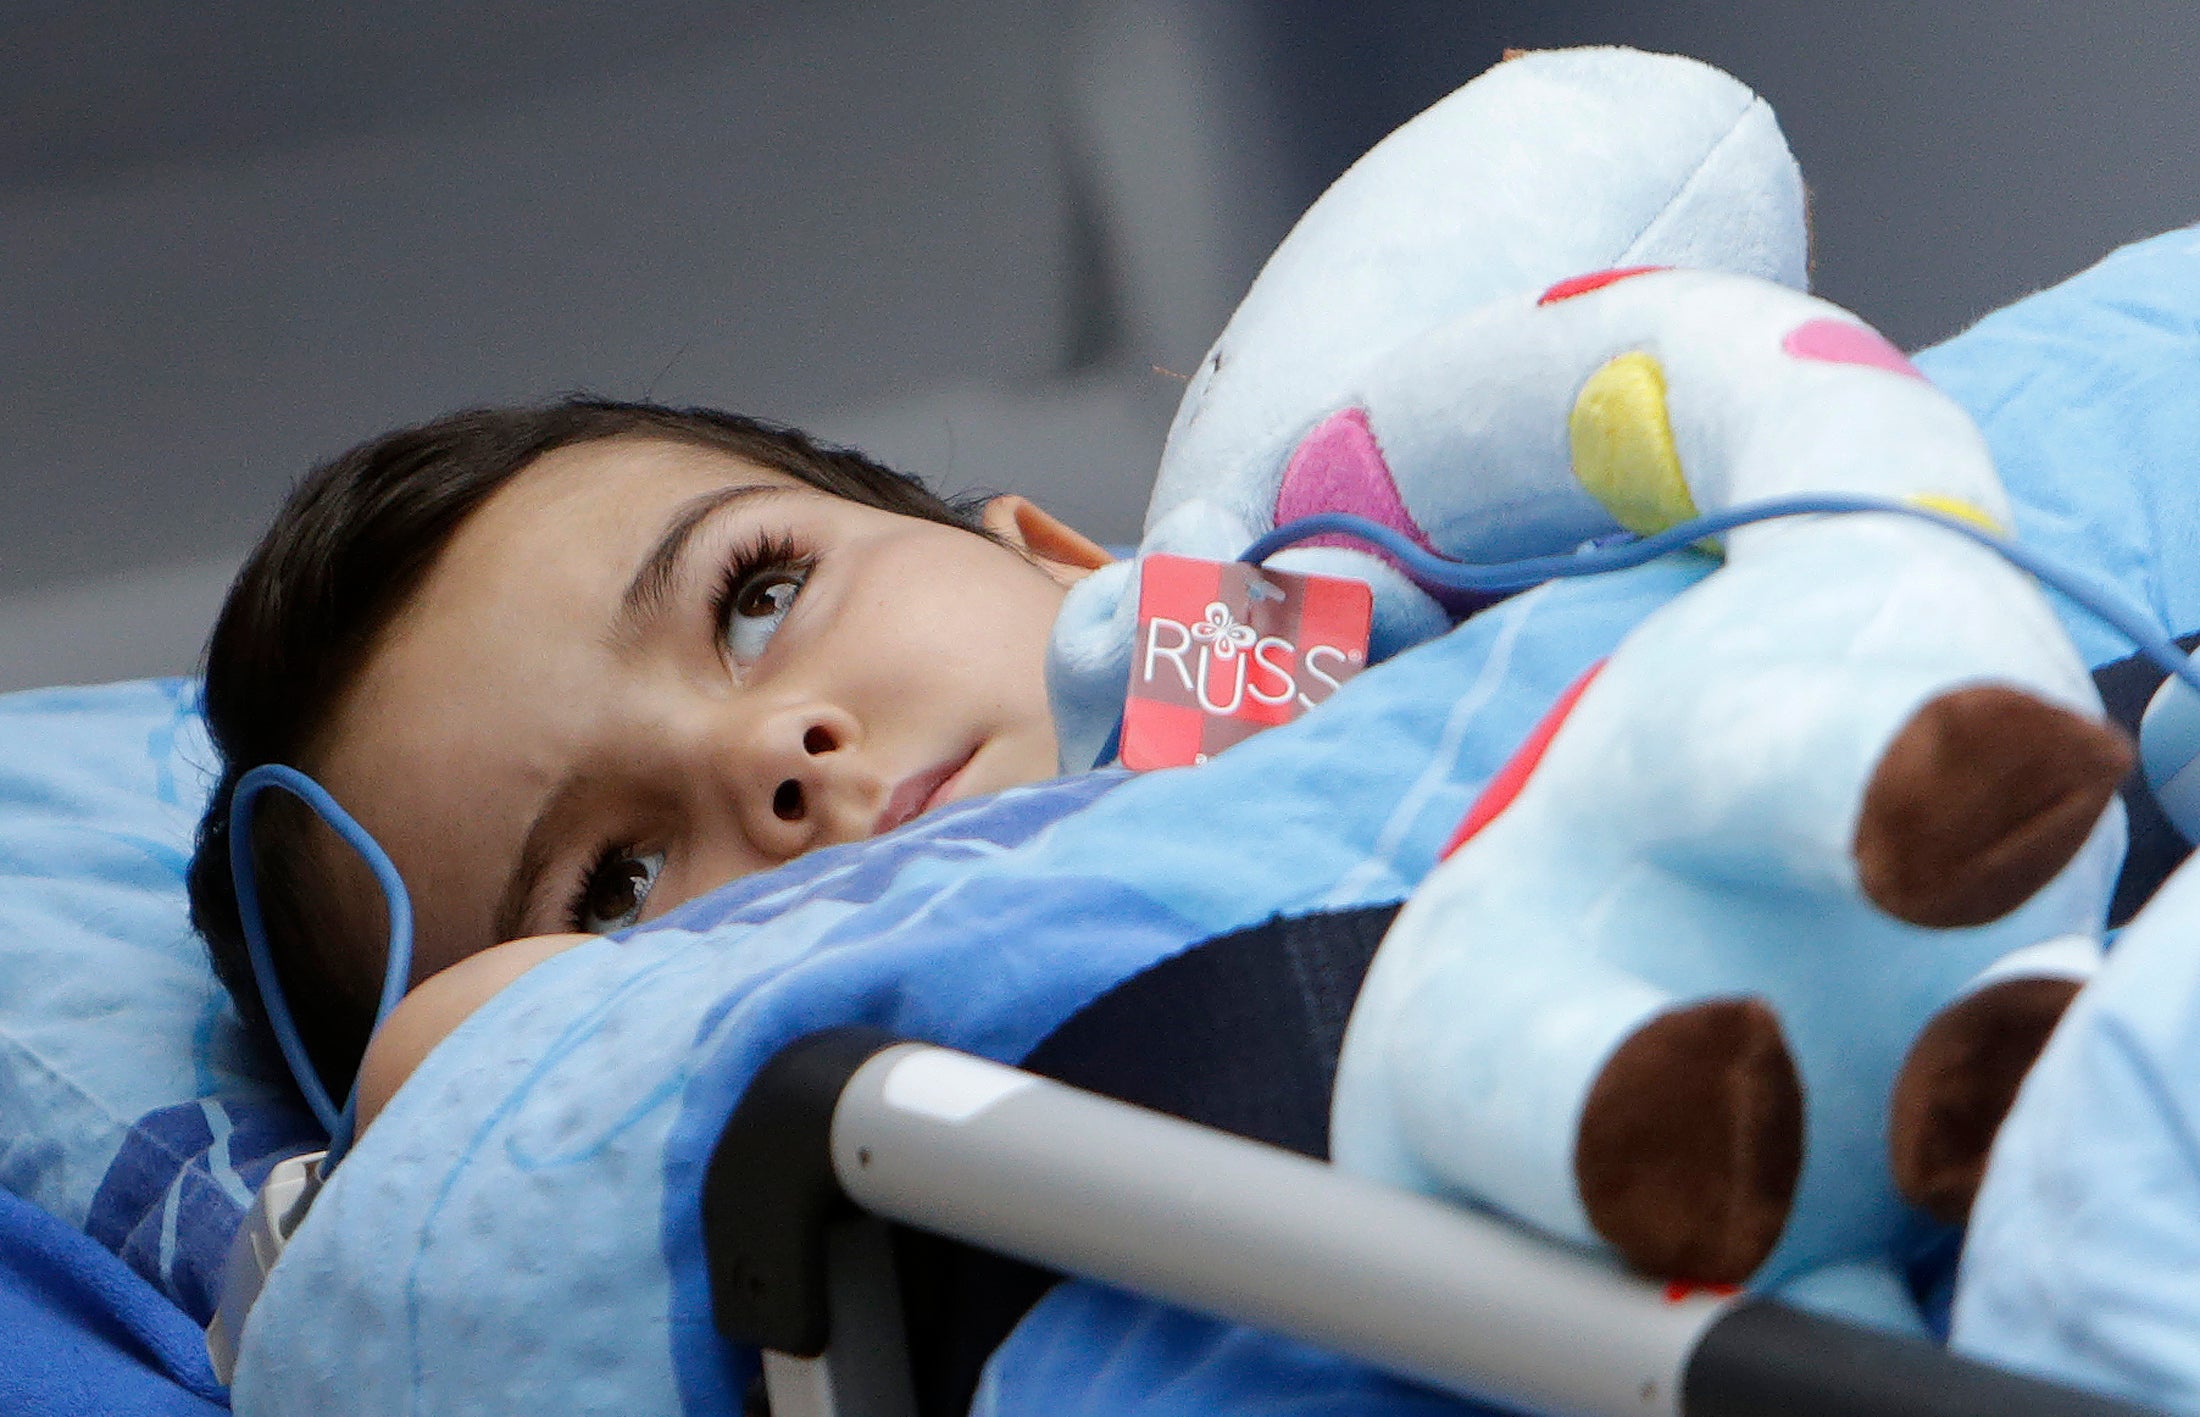 The NHS agreed to fund Ashya King's treatment in the Czech Republic